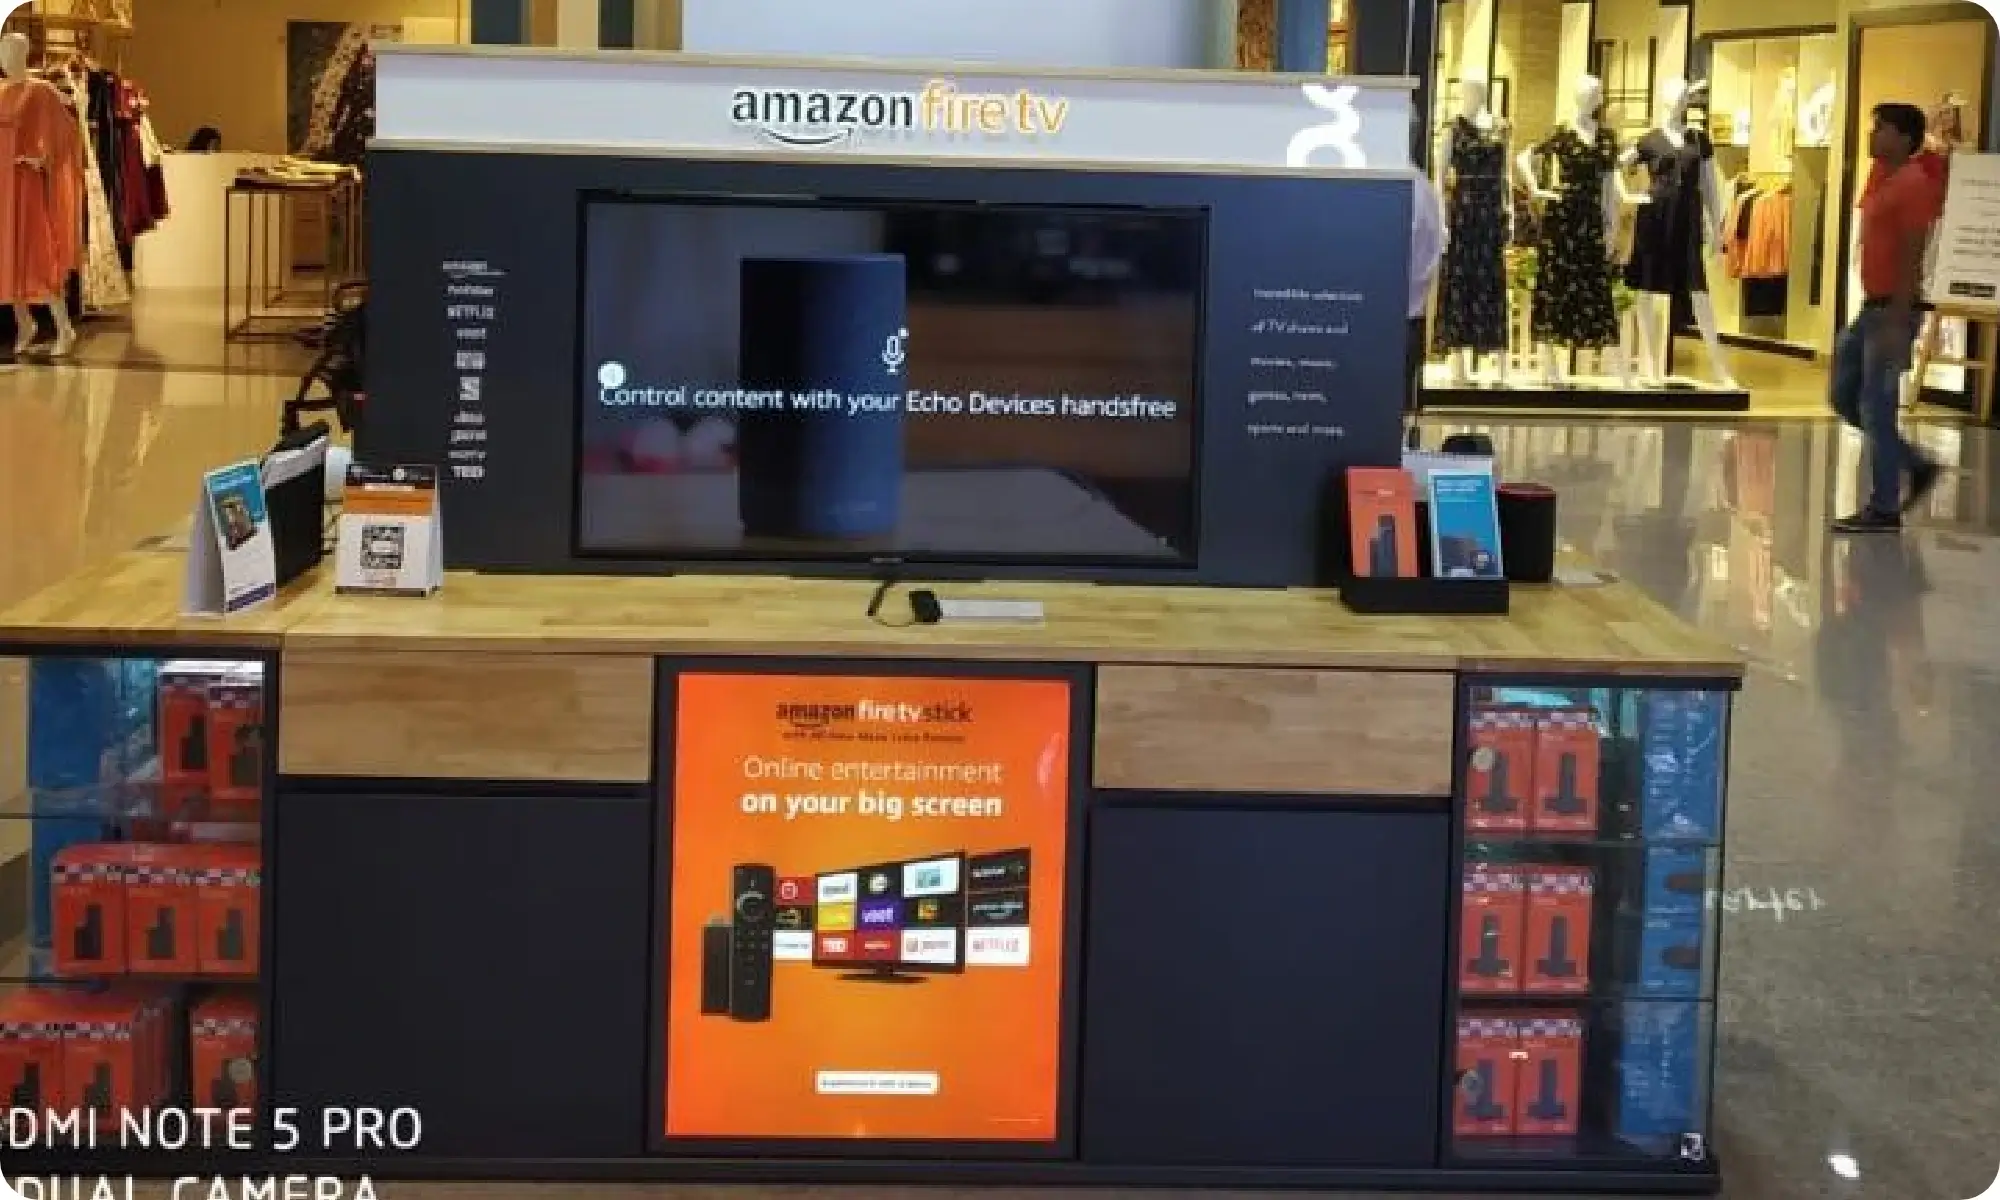 Pickcel powered Digital signage dispalys at an amazon stall in a mall 